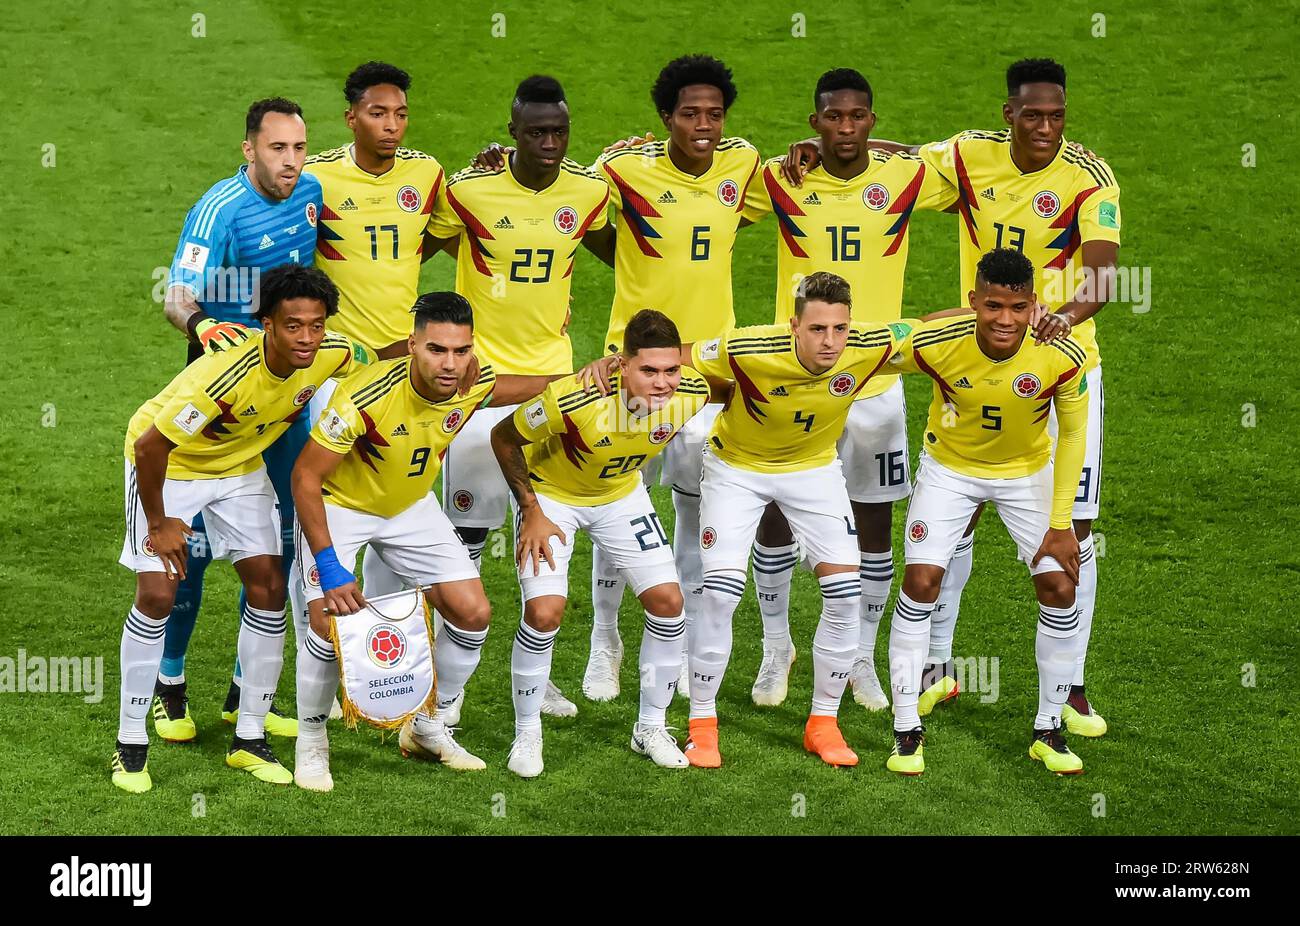 Moscow, Russia – July 3, 2018. Team photo of Colombia national football team before World Cup 2018 Round of 16 match Colombia vs England. Stock Photo